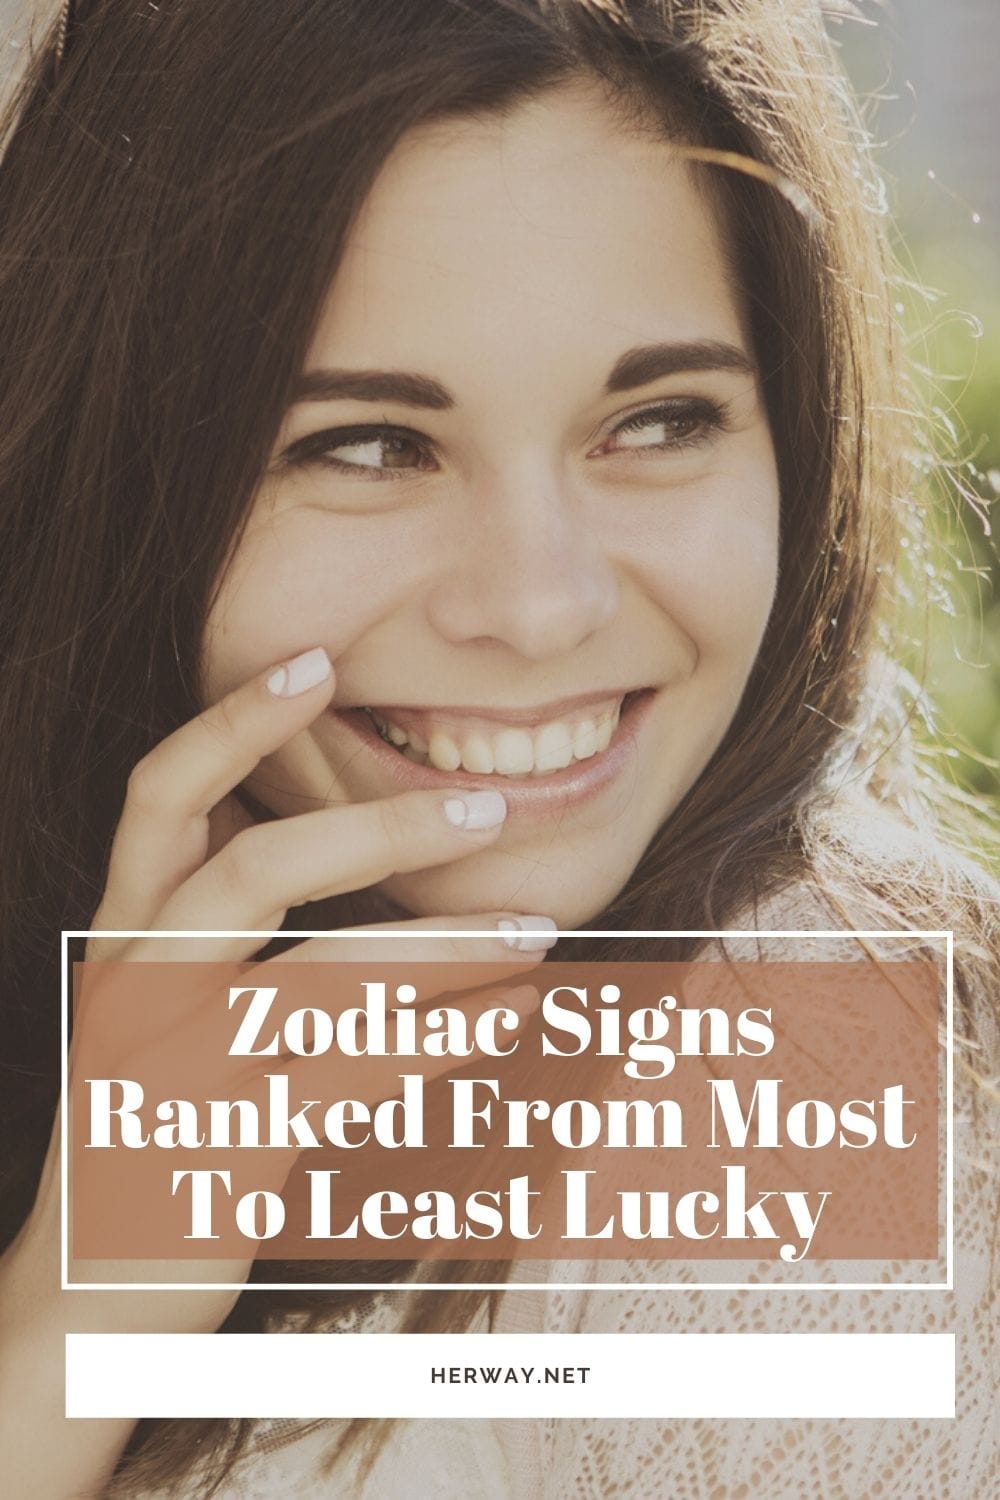 Zodiac Signs Ranked From Most To Least Lucky